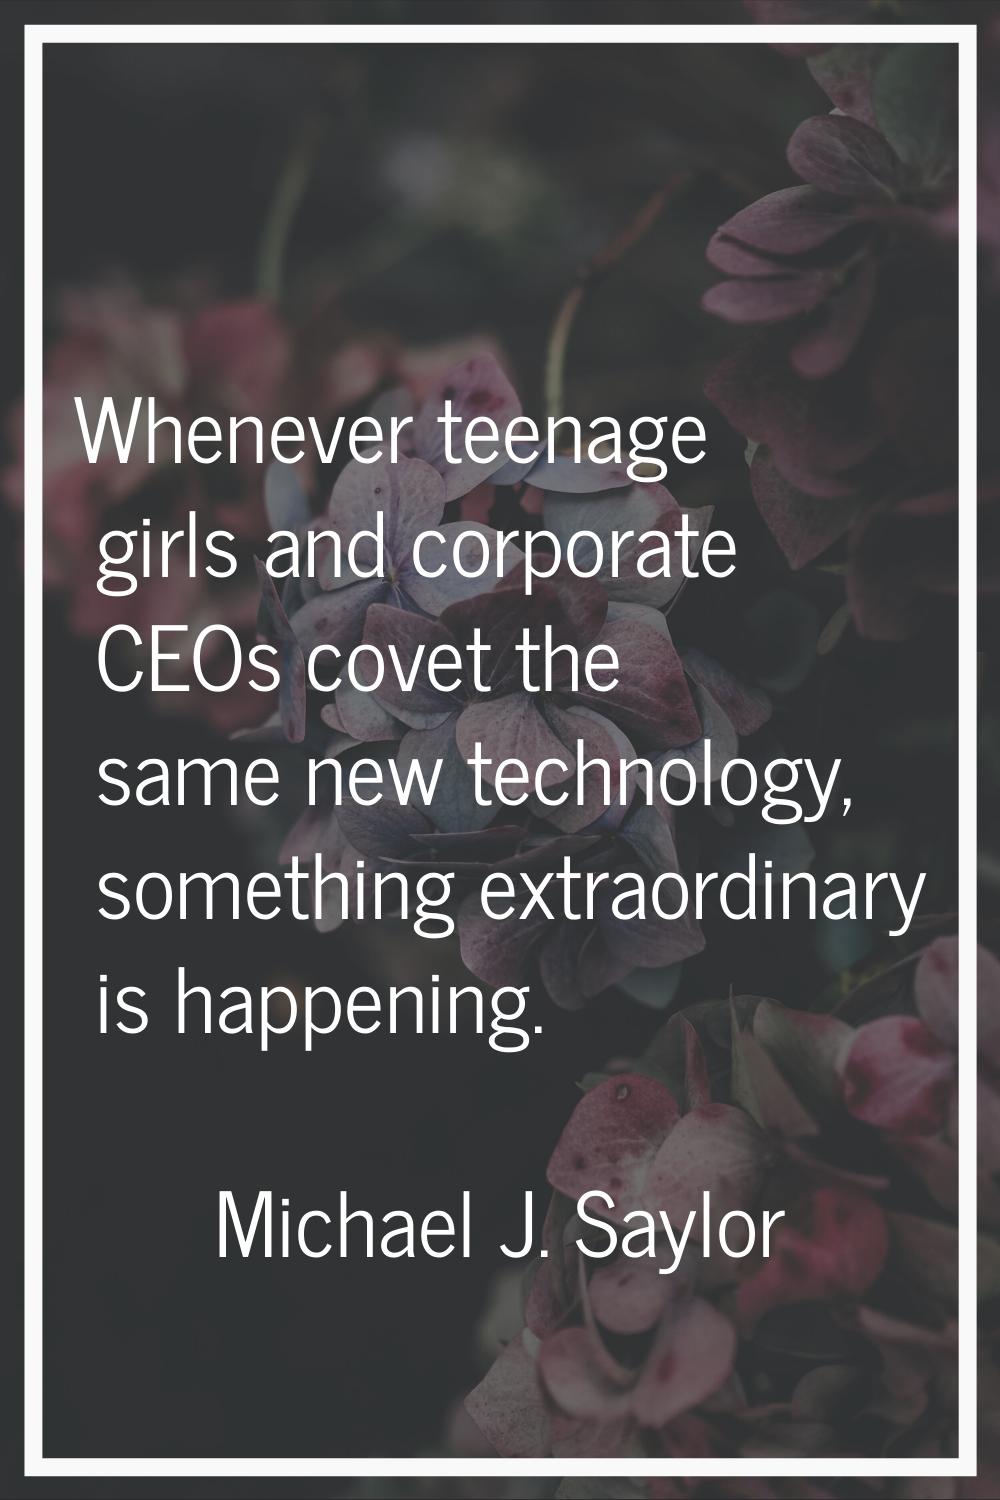 Whenever teenage girls and corporate CEOs covet the same new technology, something extraordinary is